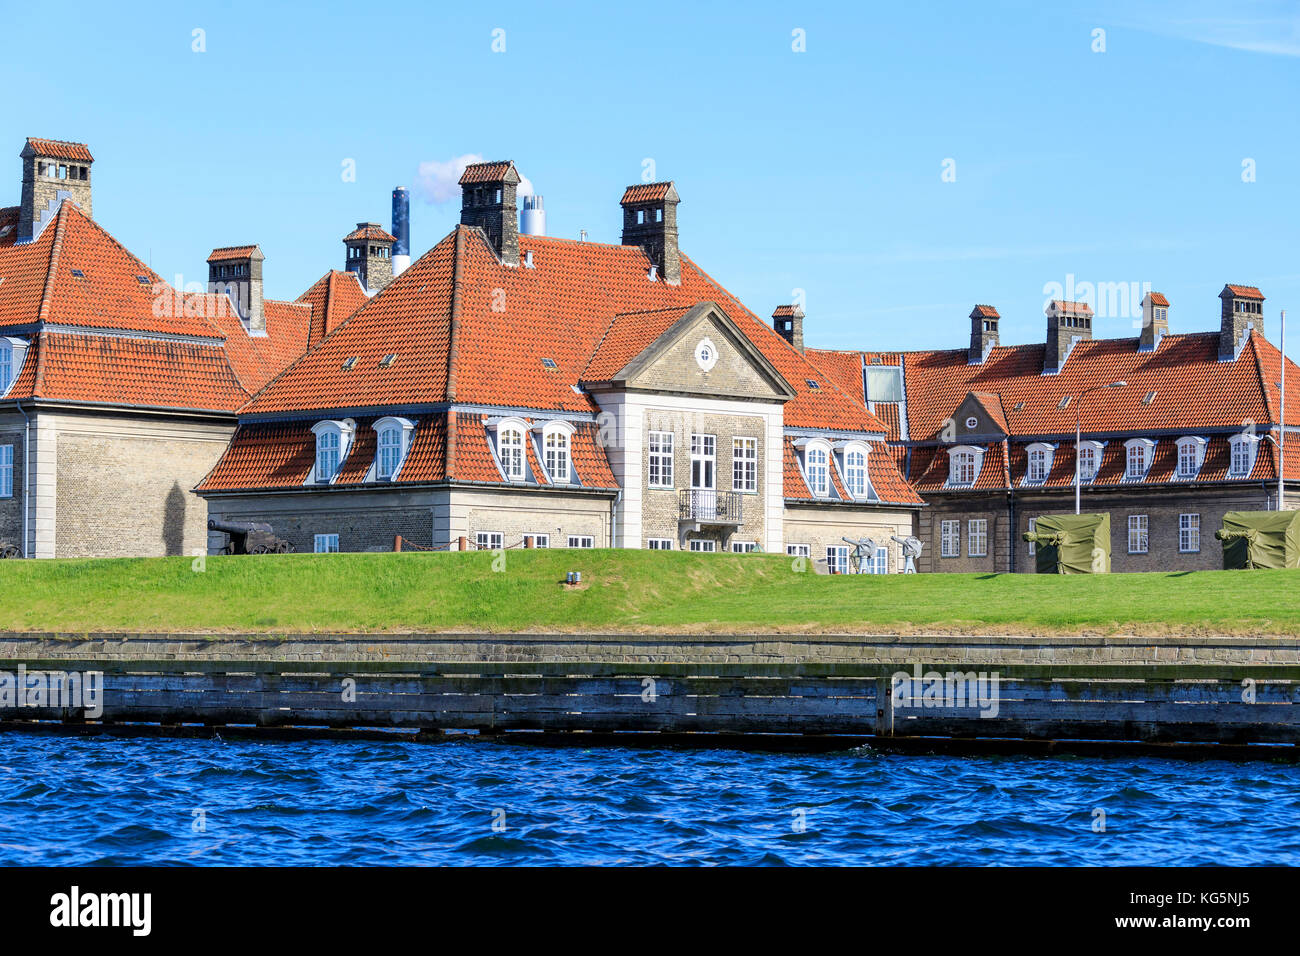 Typical houses of residential area seen from a boat trip along the canals of Copenhagen, Denmark Stock Photo